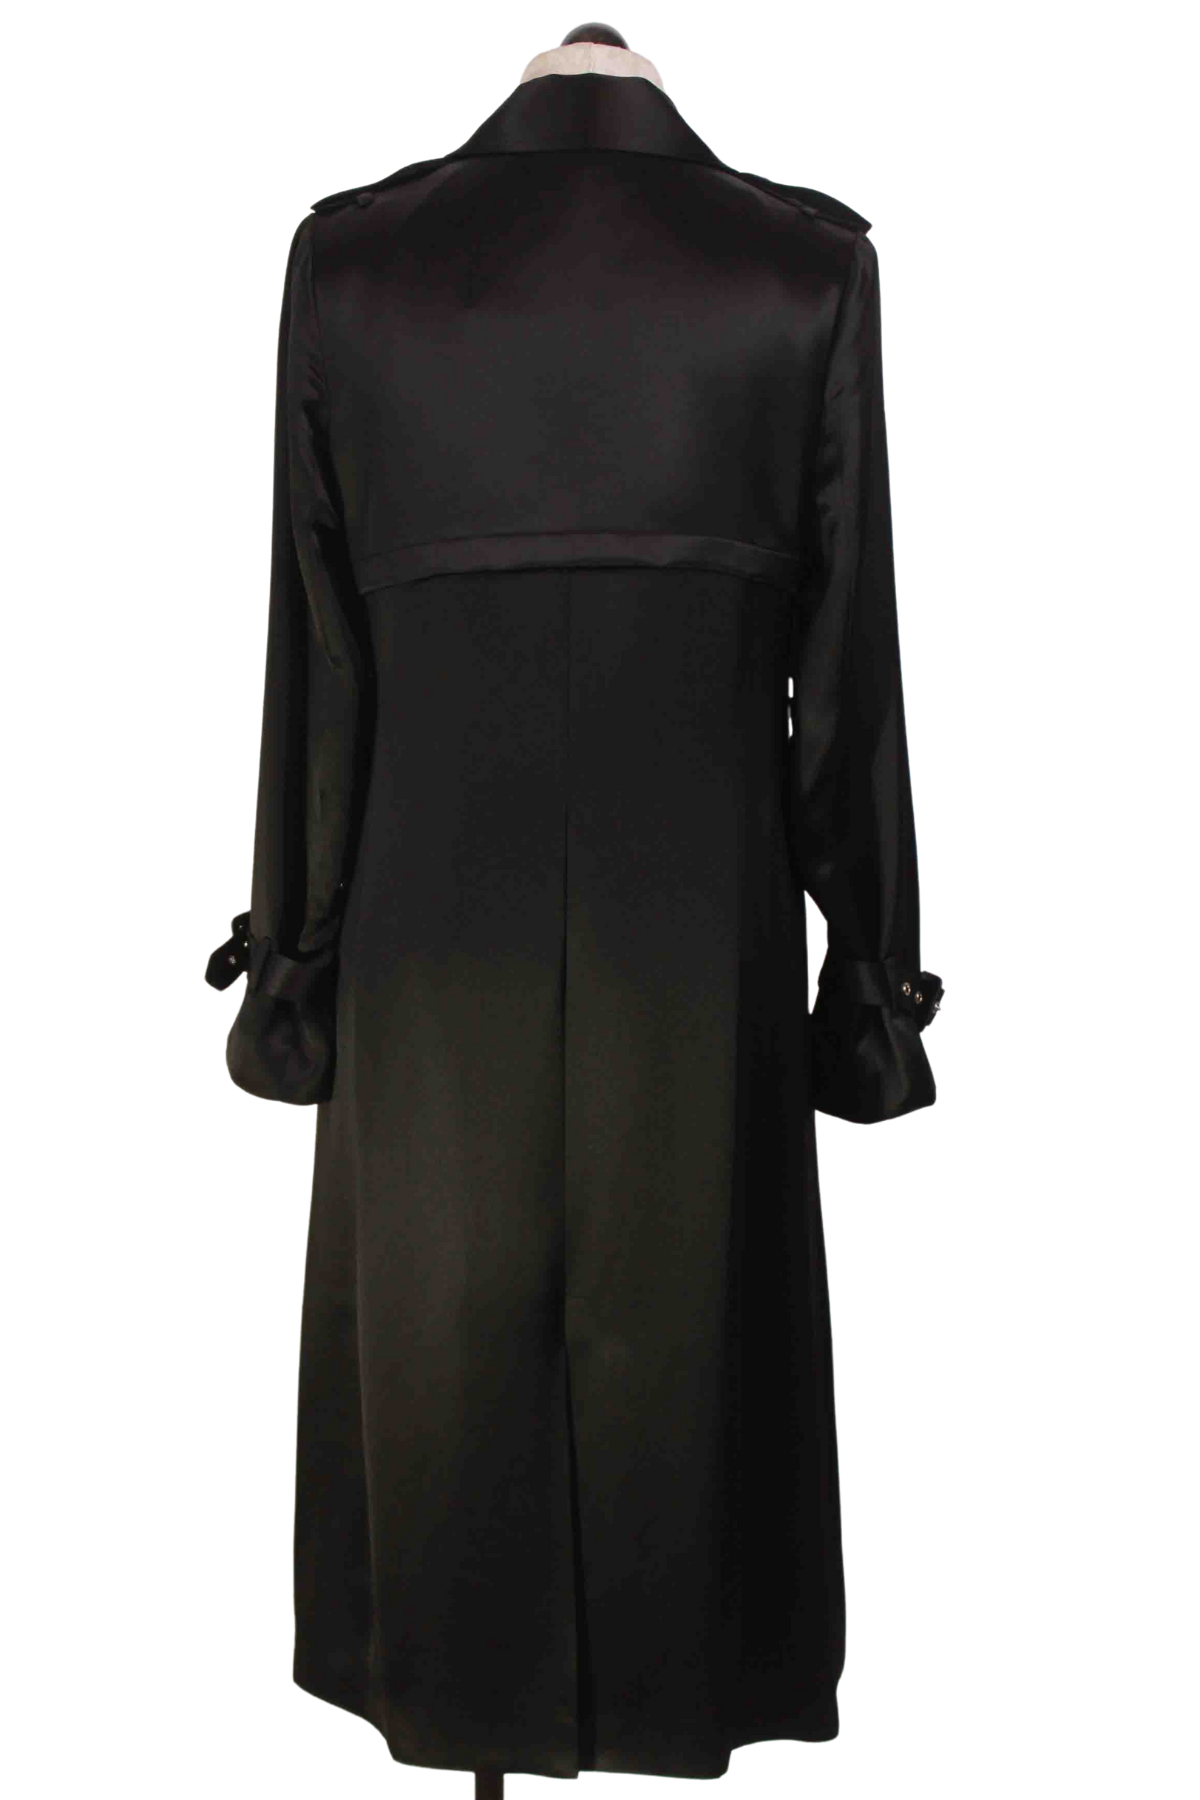 back view of Belted Black Satin Trench Coat by Jessie Liu with belted sleeve straps